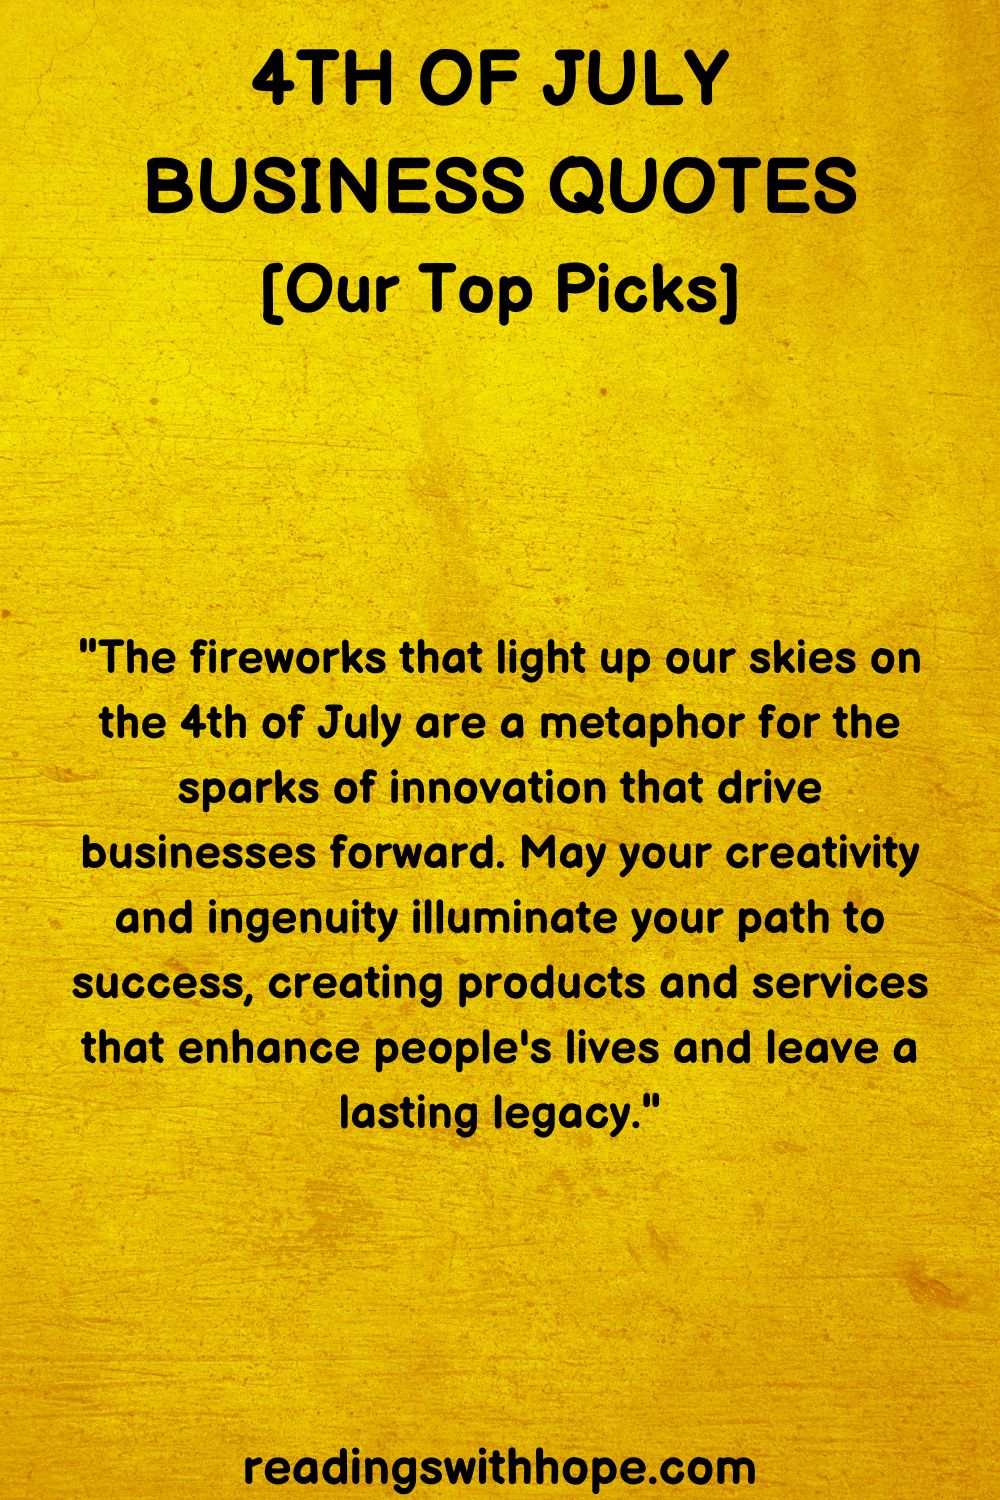 4th of July Business Quotes